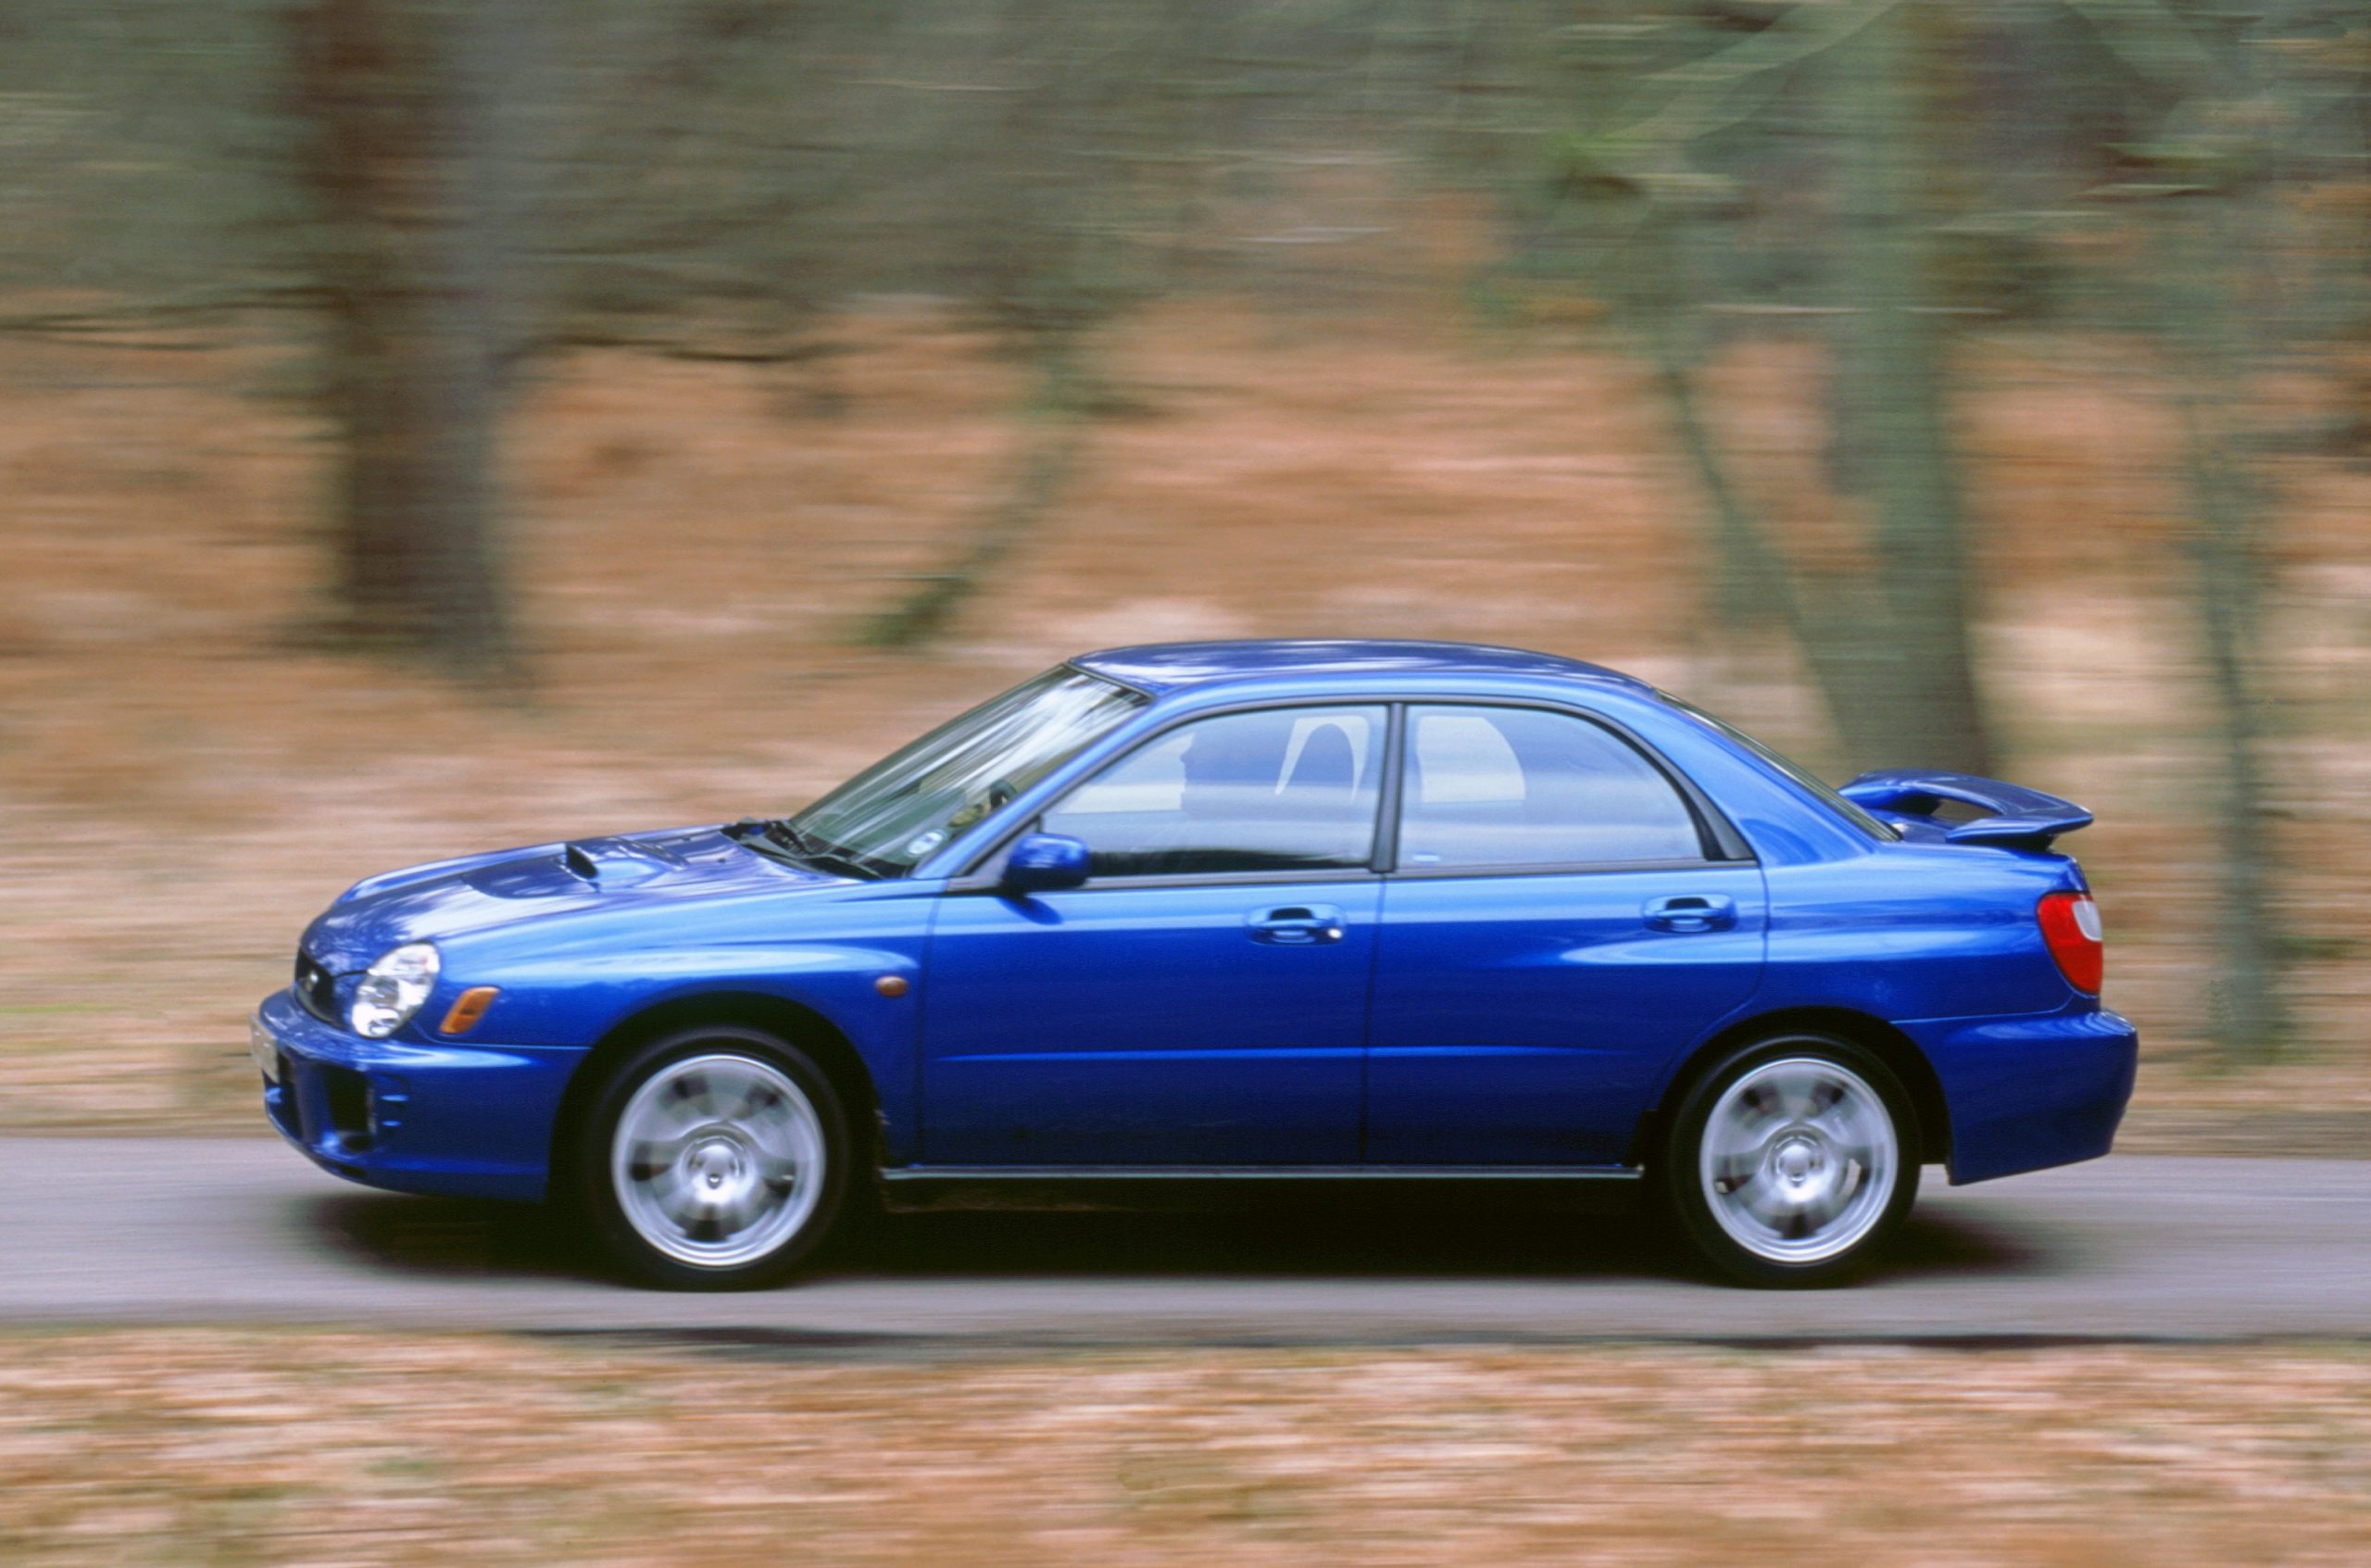 A blue Subaru WRX shot in profile with a blur effect as it speeds down a forest trail